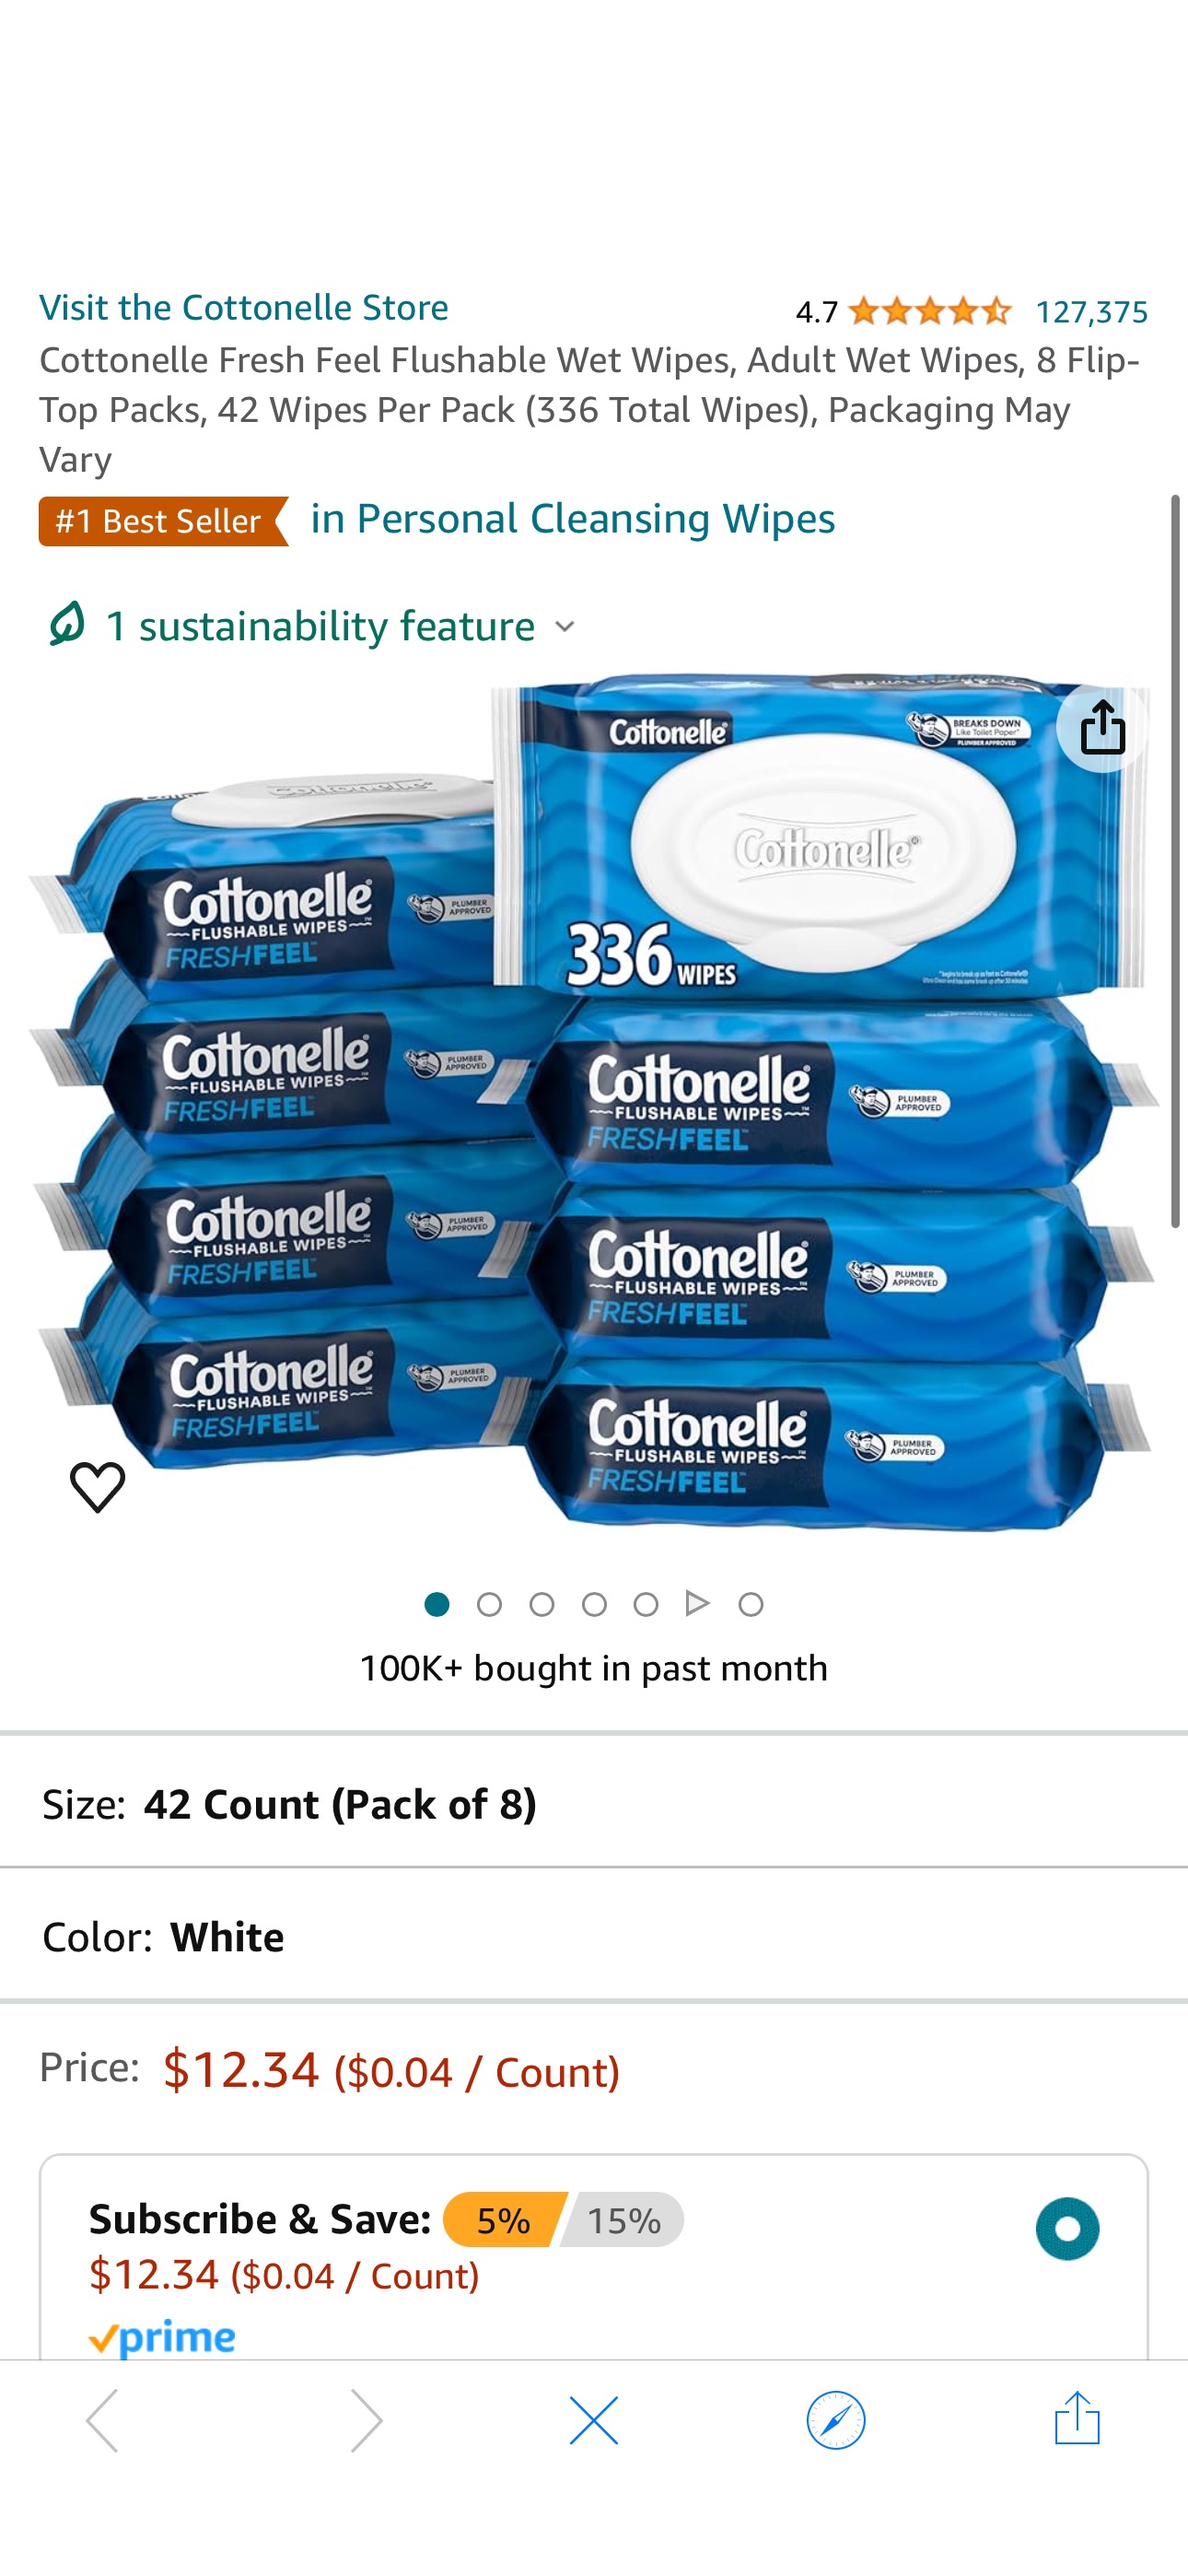 Amazon.com: Cottonelle Fresh Feel Flushable Wet Wipes, Adult Wet Wipes, 8 Flip-Top Packs, 42 Wipes Per Pack (336 Total Wipes), Packaging May Vary : Health & Household